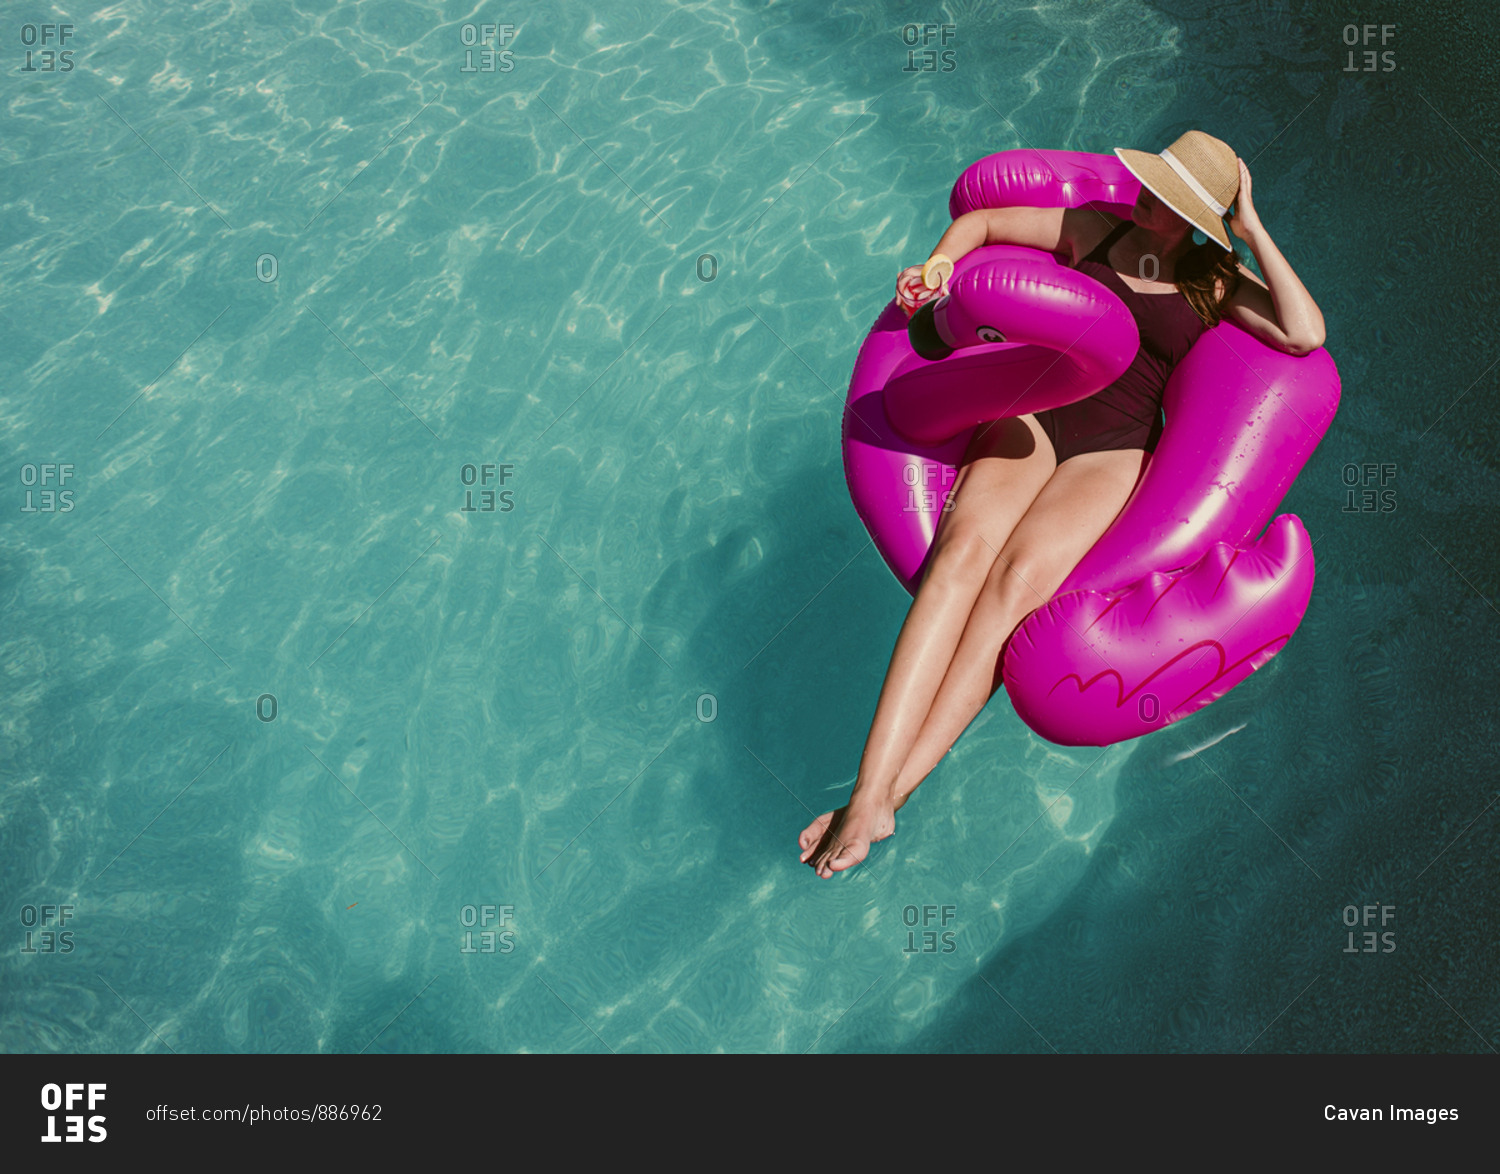 Top view of woman floating on inflatable pink flamingo in a pool.